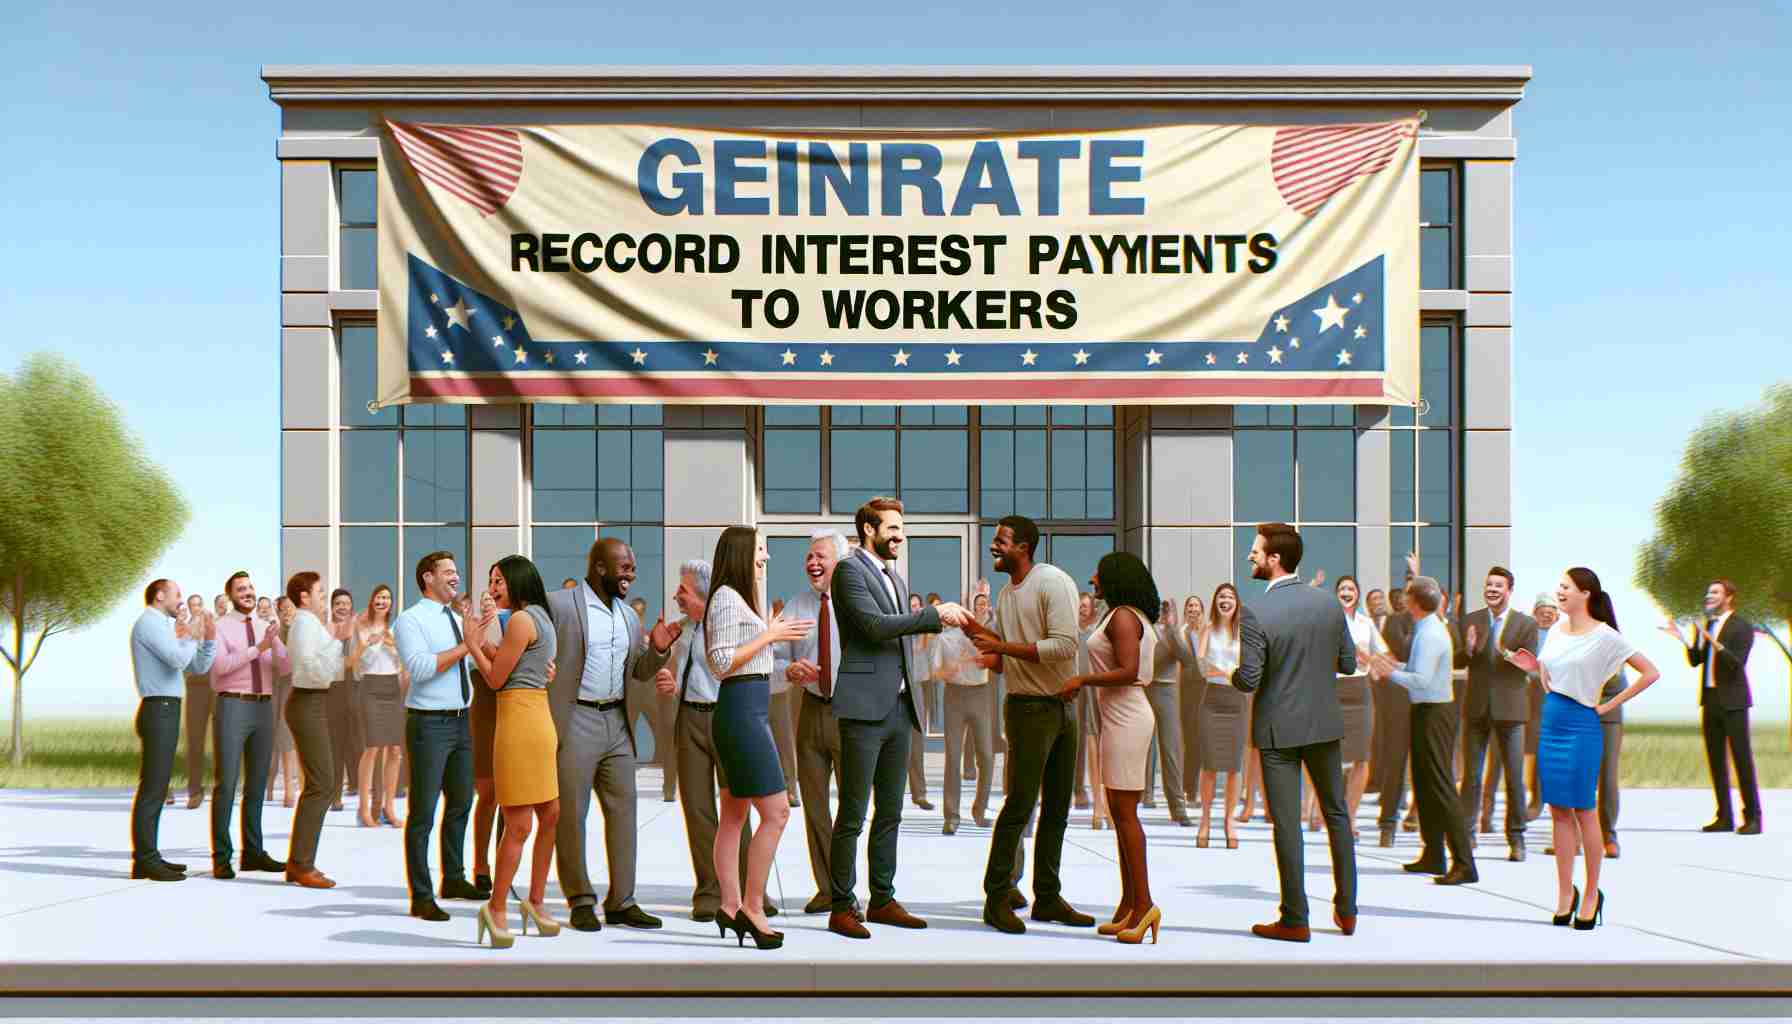 Mortgage Center Announces Record Interest Payments to Workers